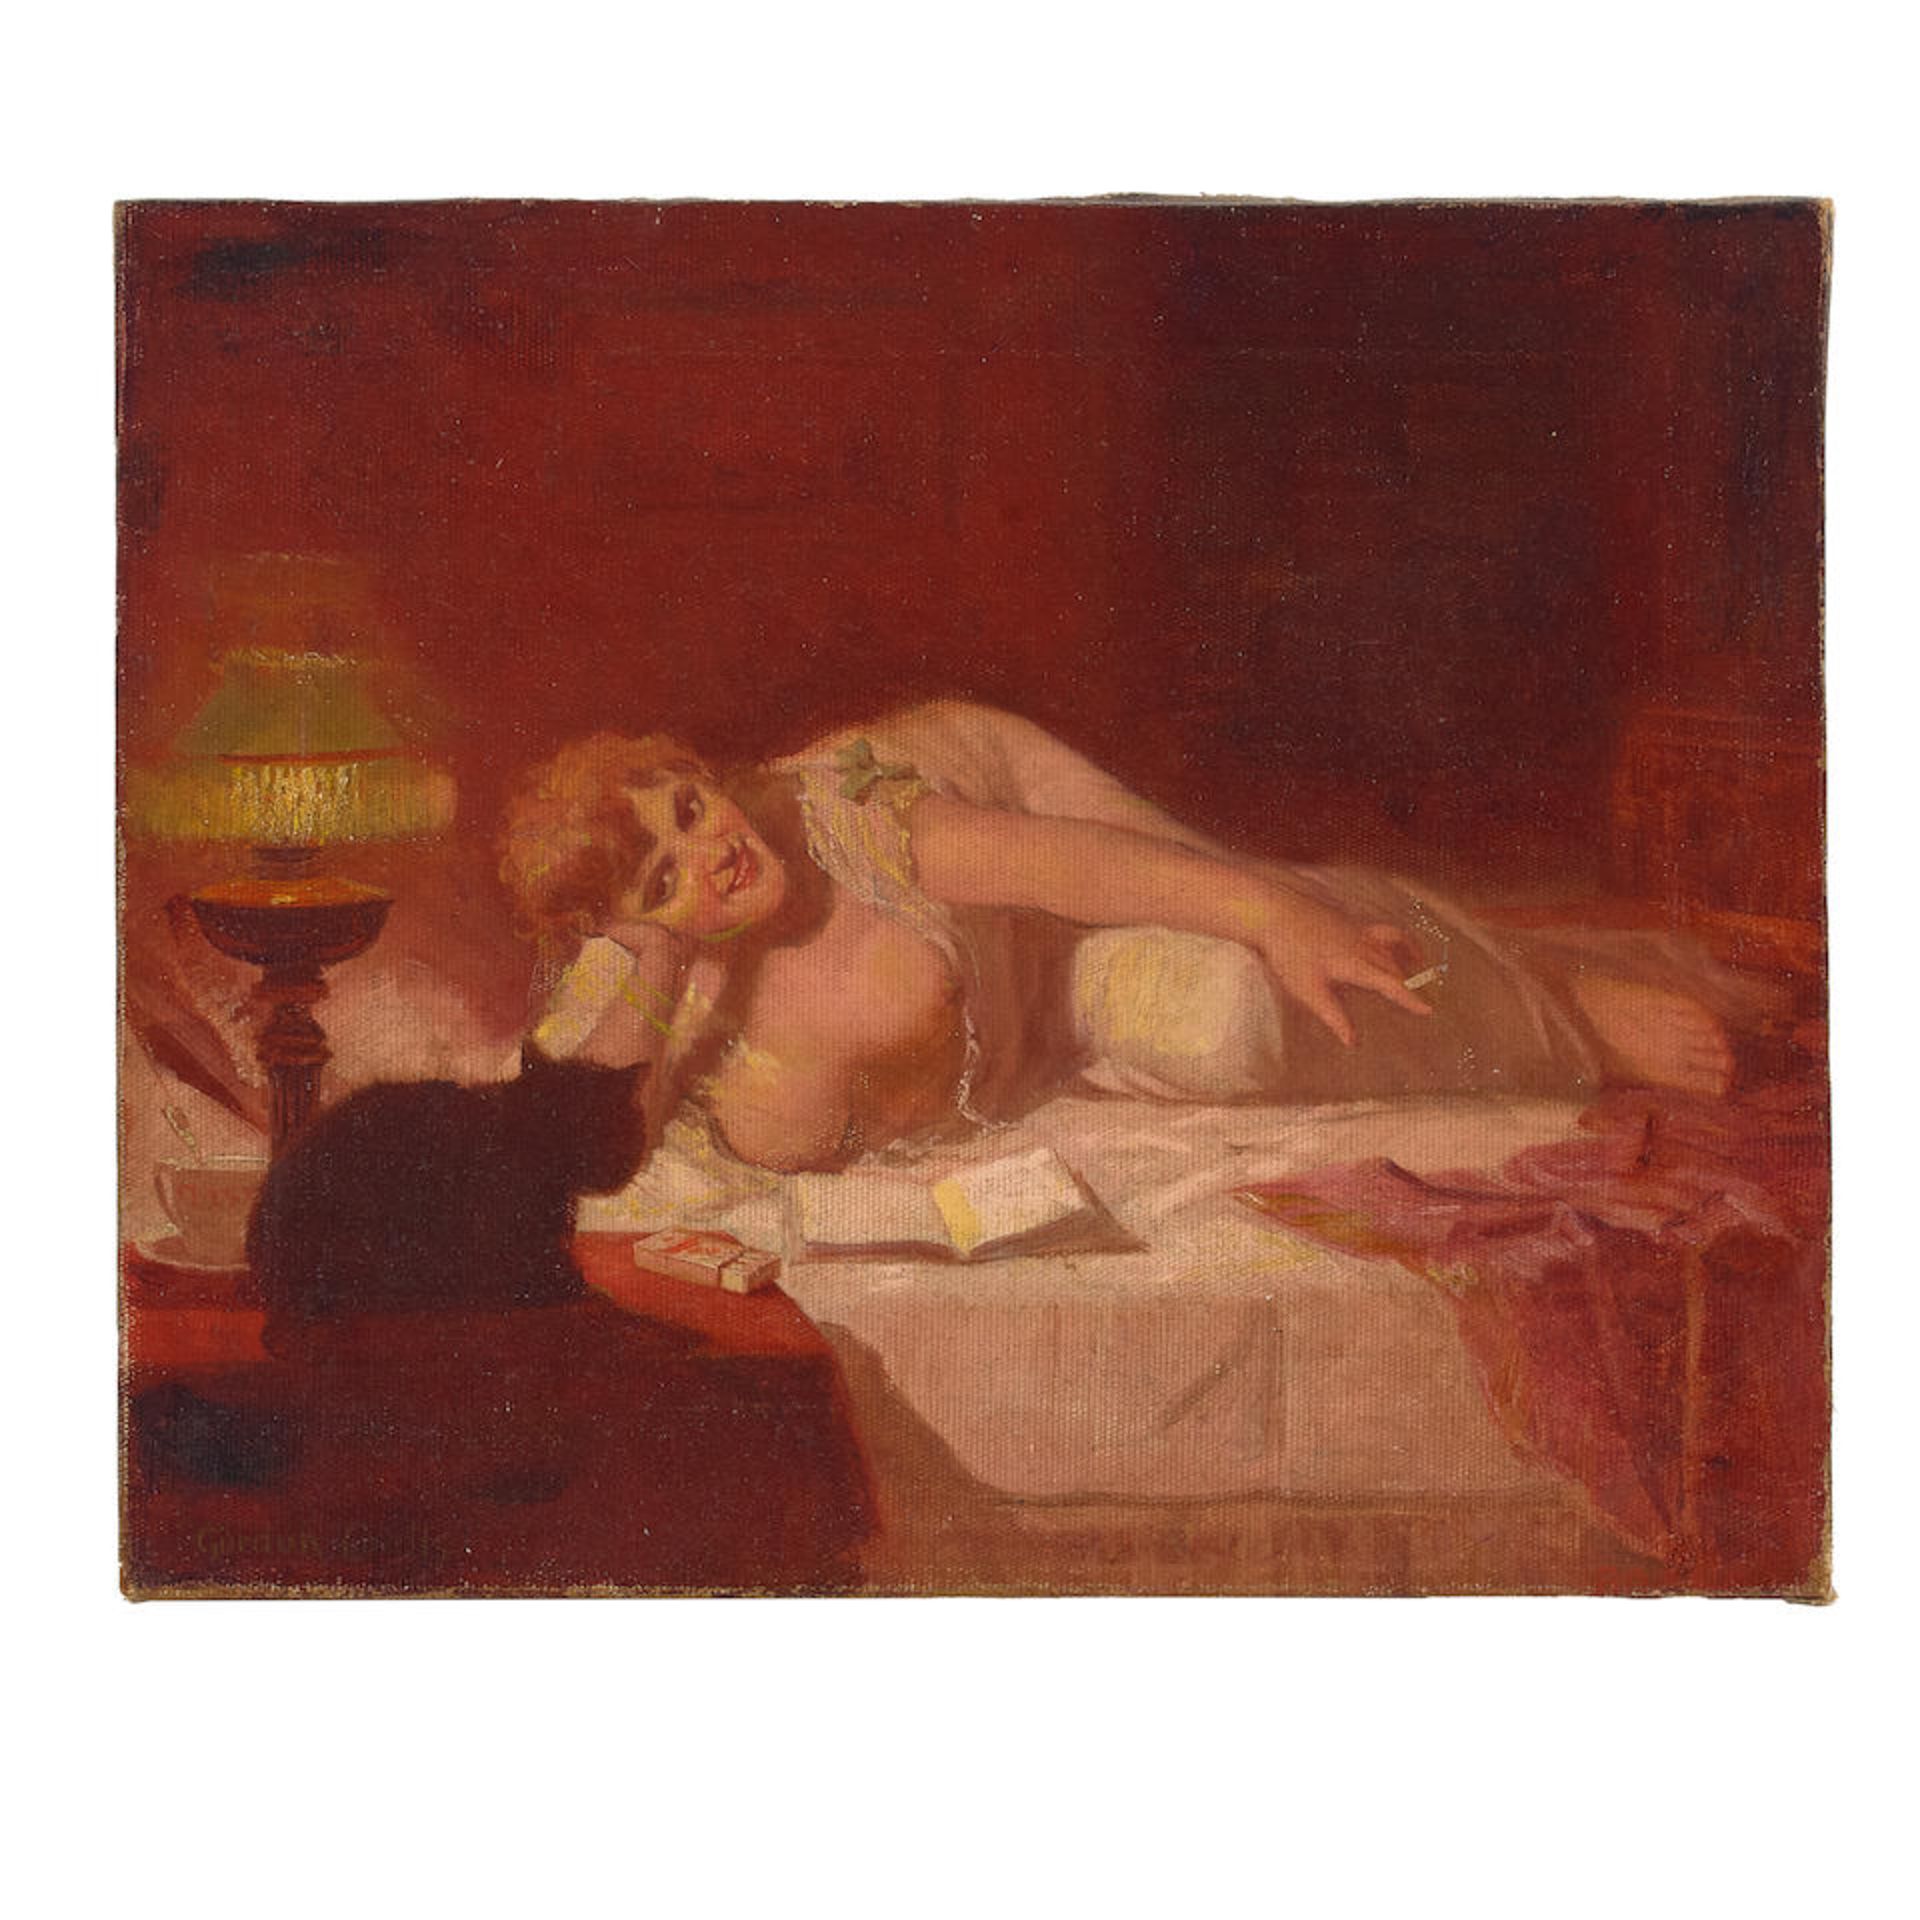 Gordon Coutts (1868-1937) Odalisque 13 x 16 in. unframed - Image 2 of 2